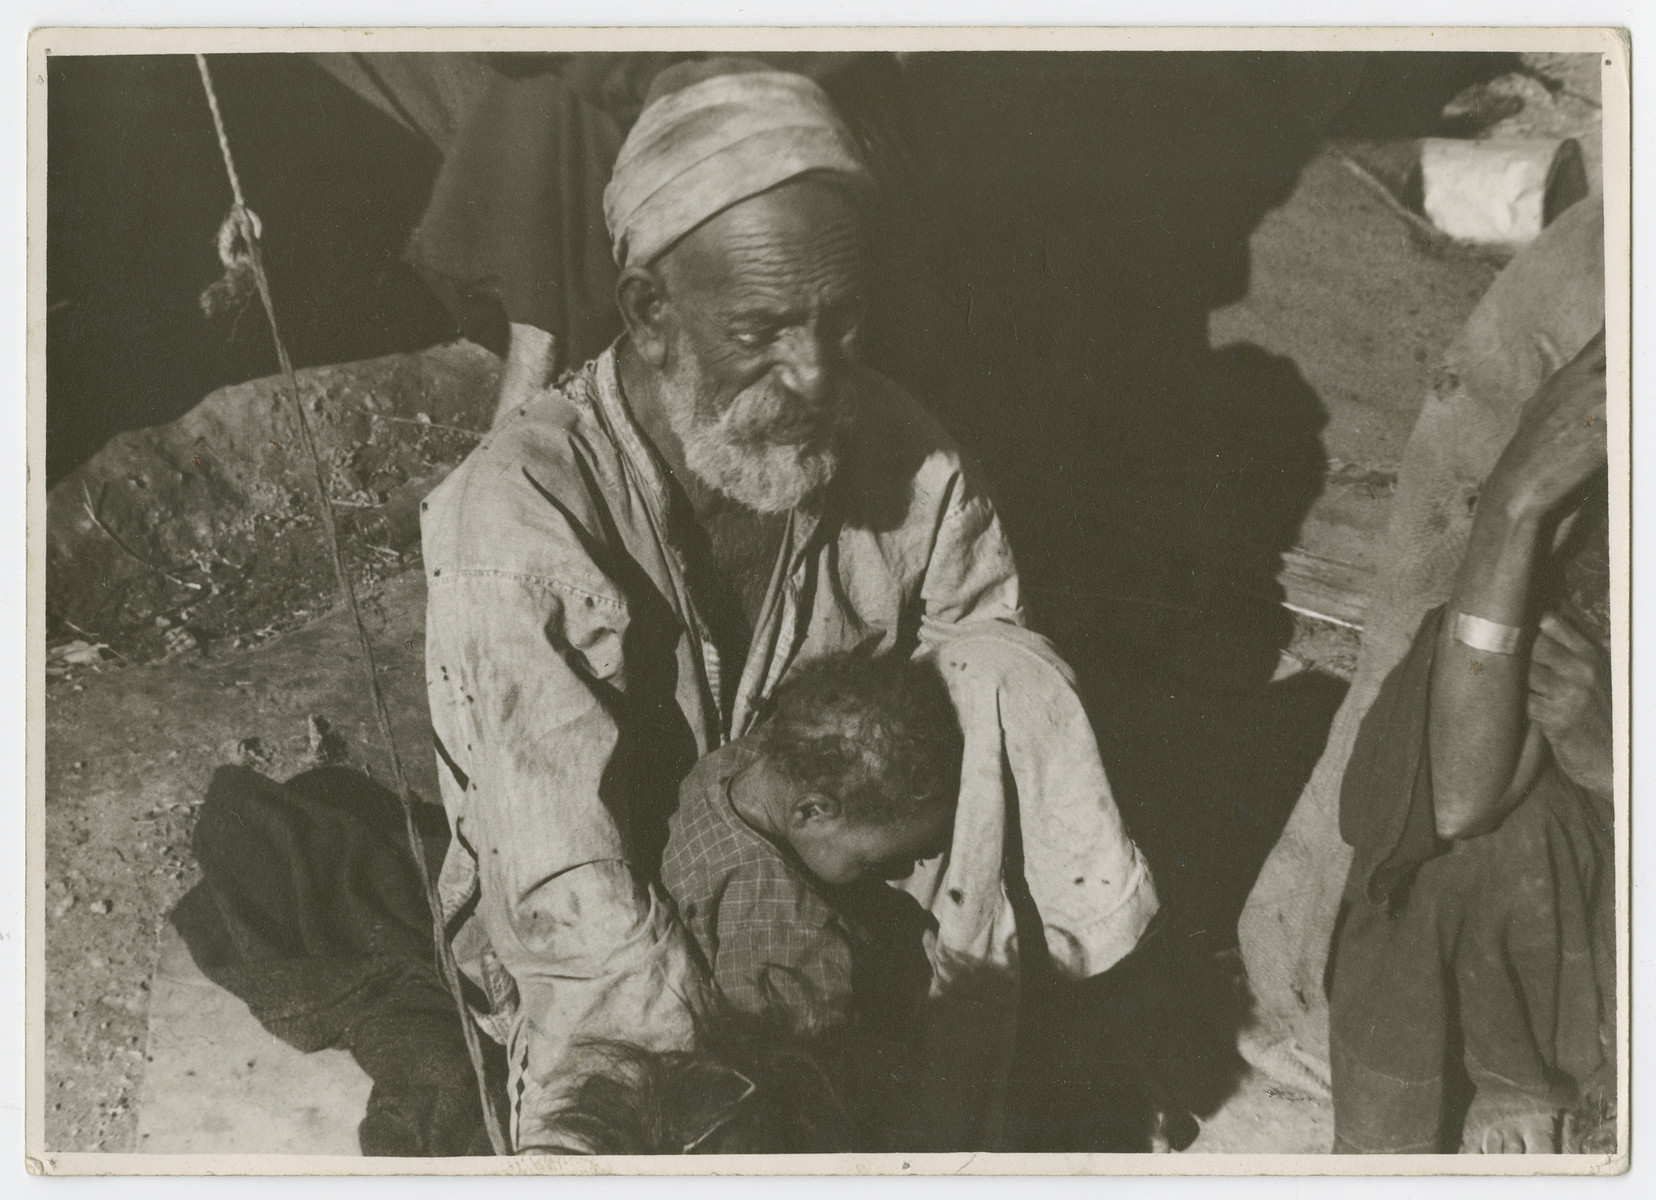 An older man and young child [probably Sephardic] sit outsie a tent.

Photograph is used on page 253 of Robert Gessner's "Some of My Best Friends are Jews."